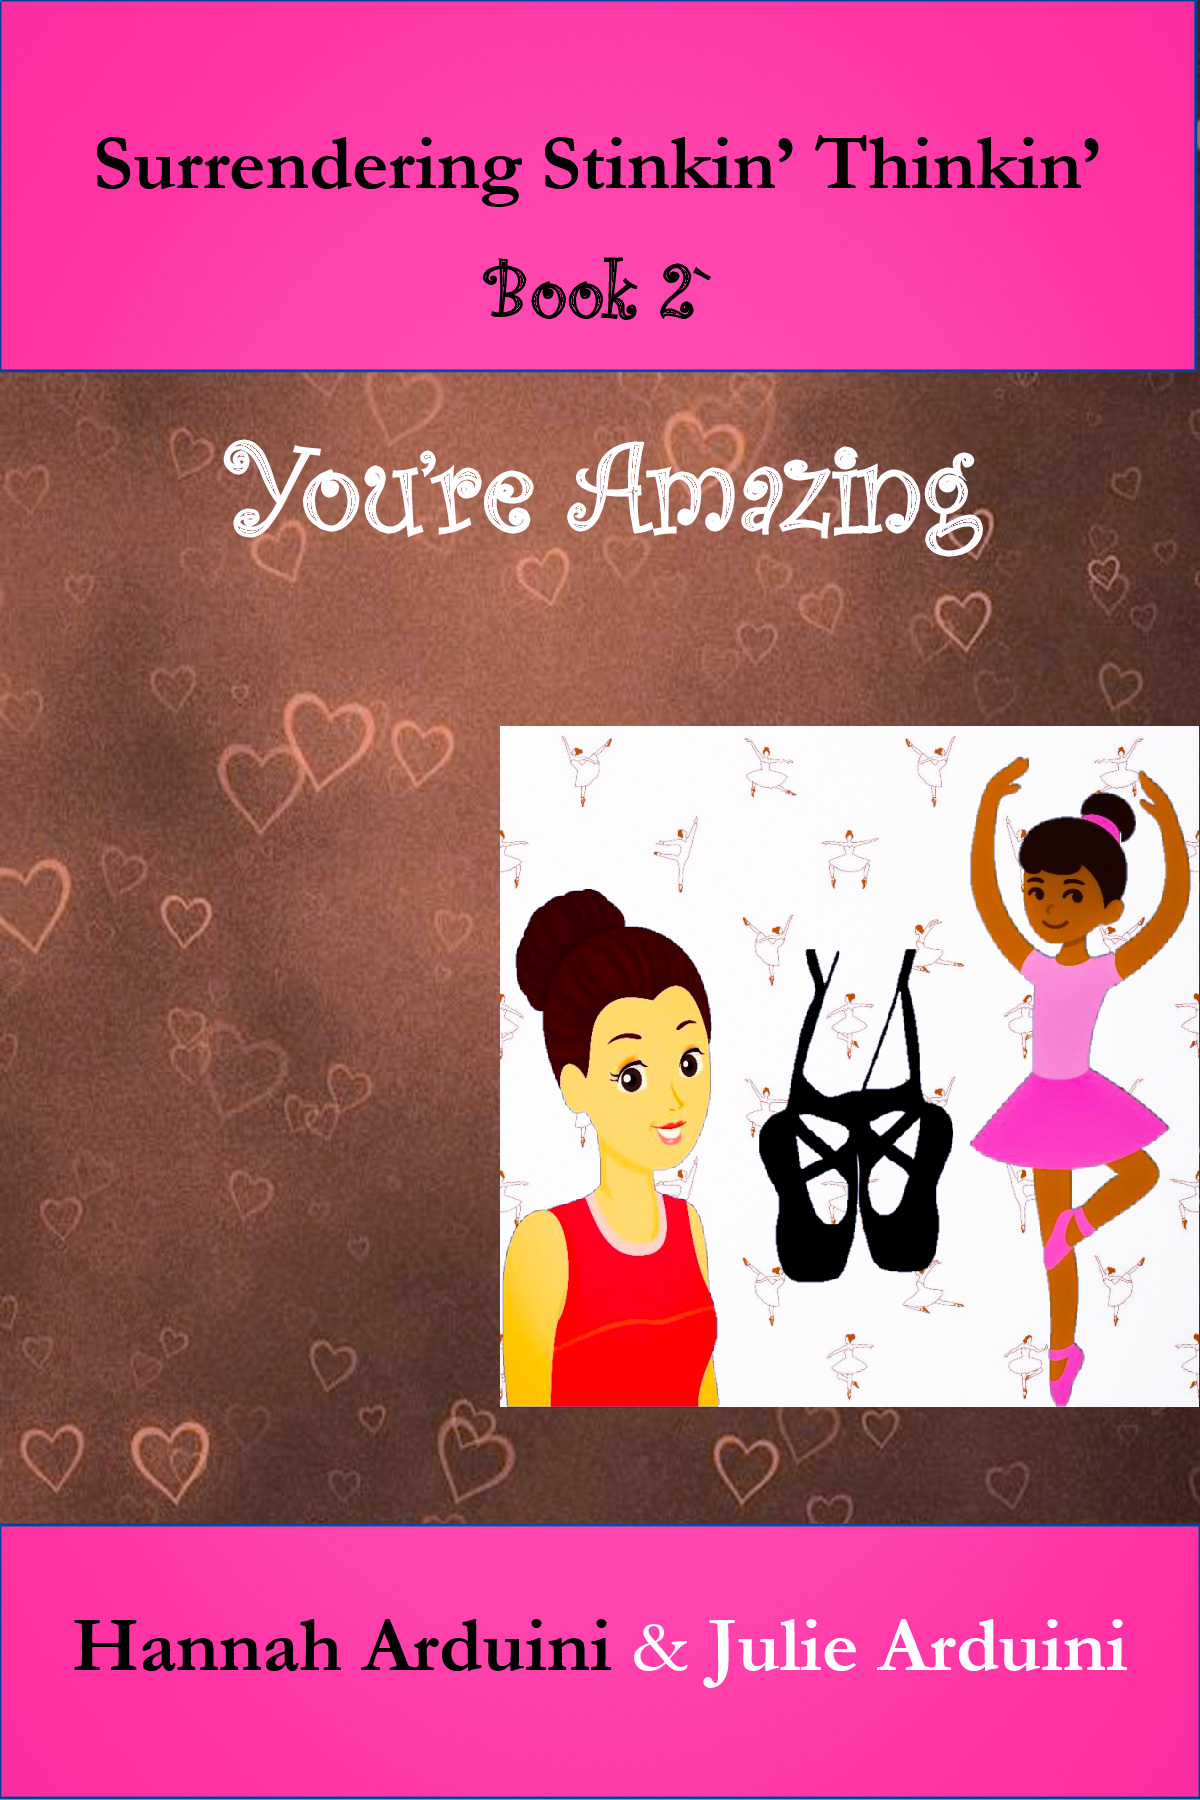 FREE: You’re Amazing by Hannah Arduini & Julie Arduini